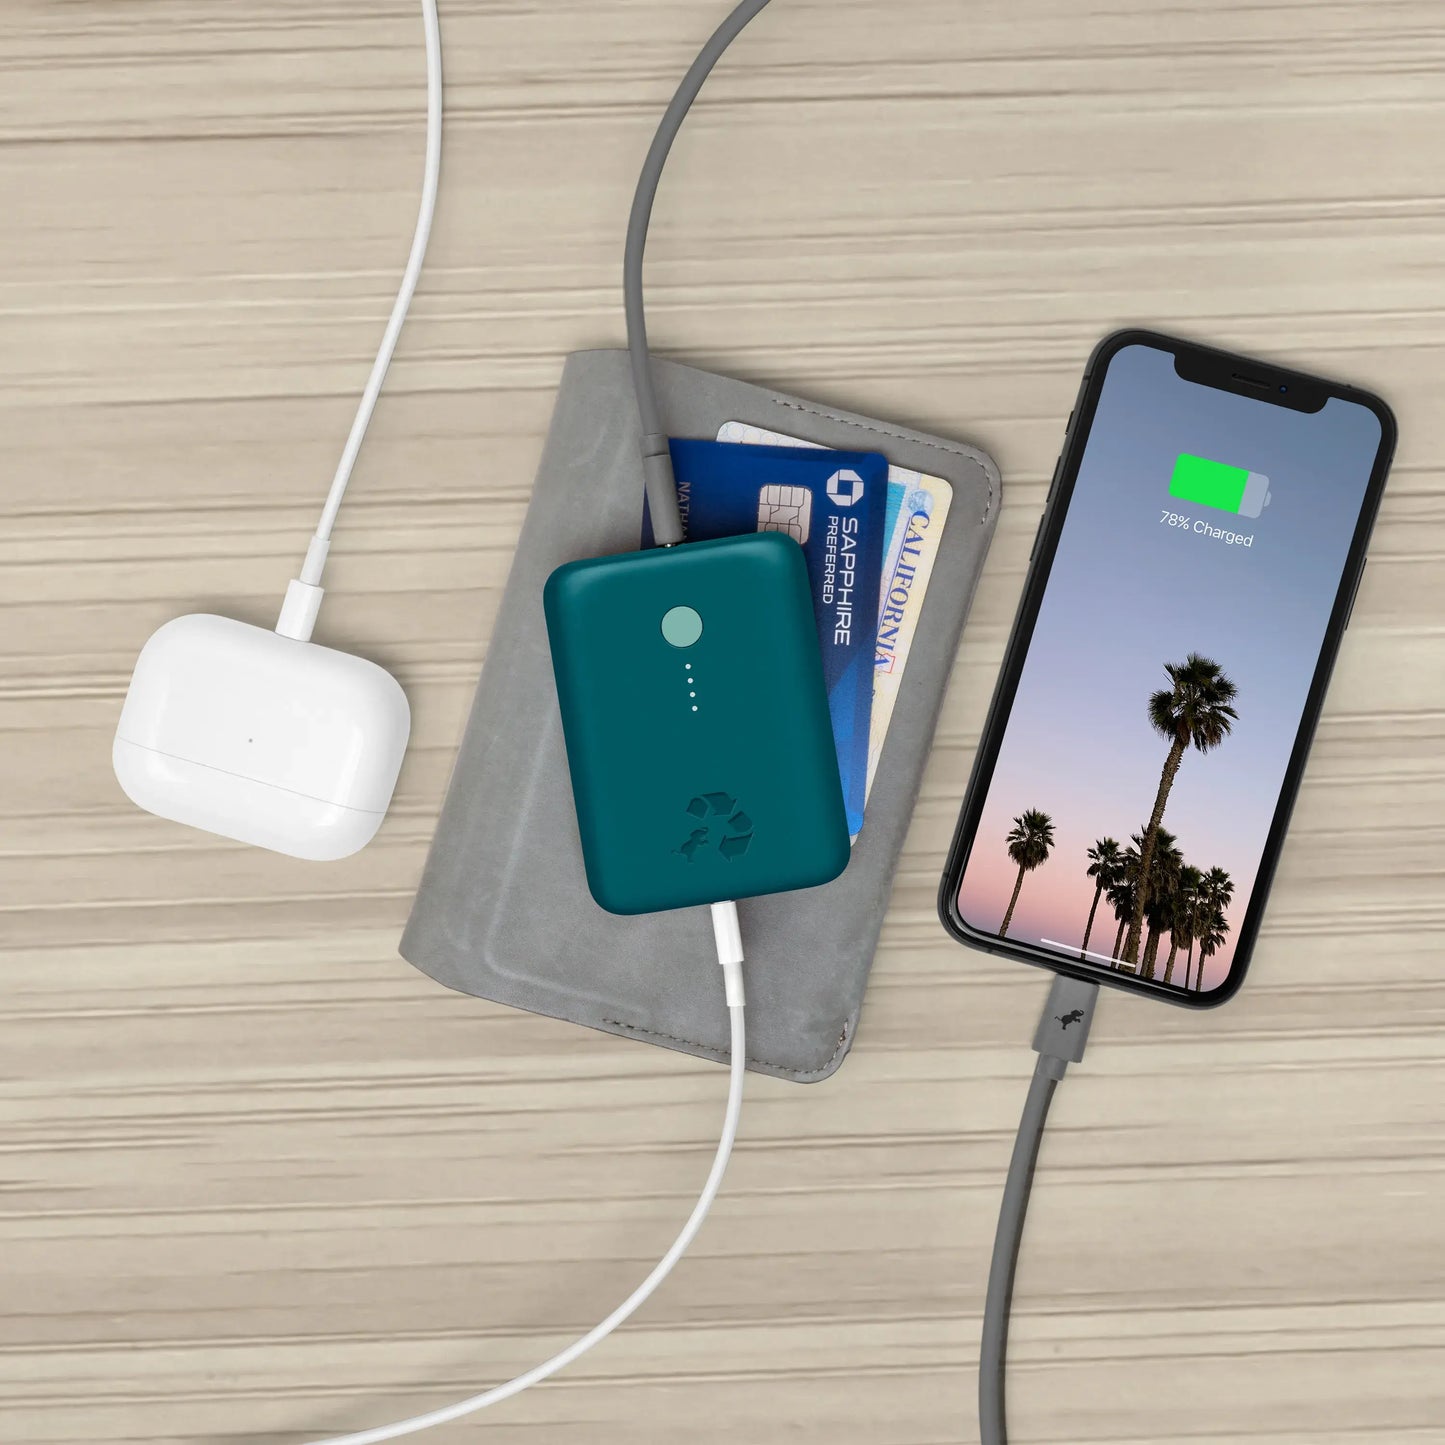 Turquoise portable charger with green button connected to airpods and cell phone.